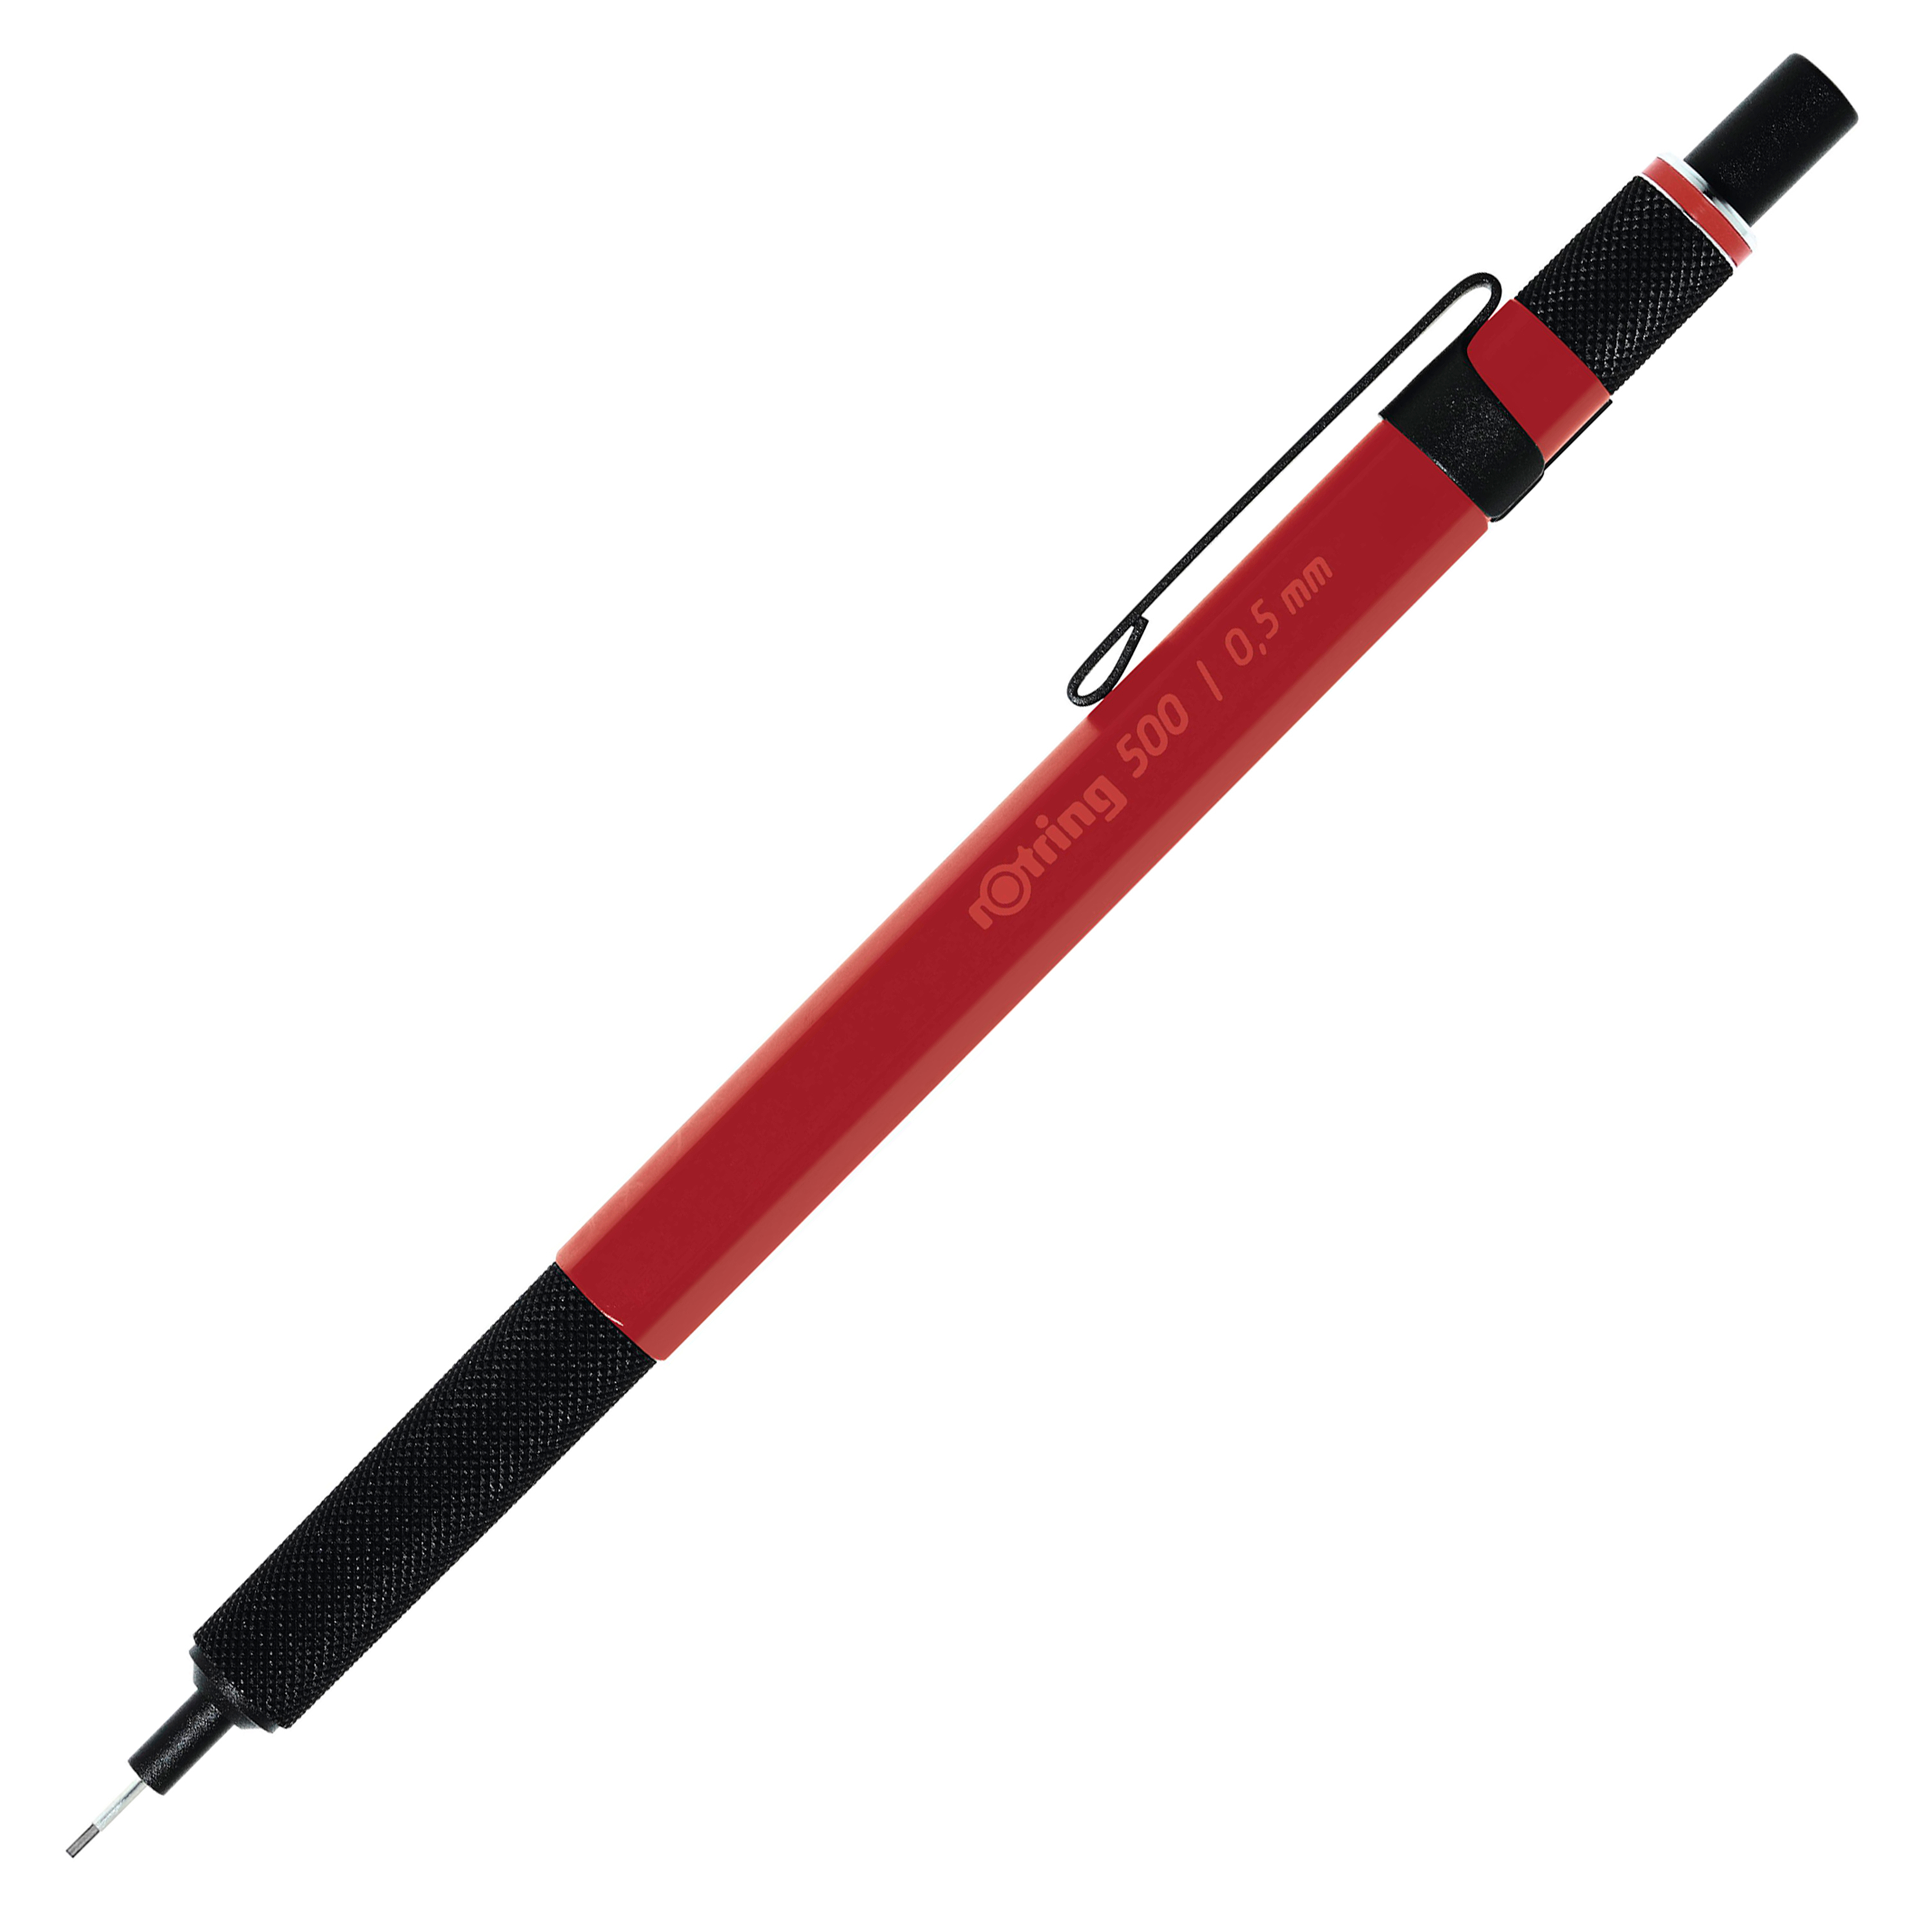 ROTRING Porte-mines fin 500 M 2164107 rot rot